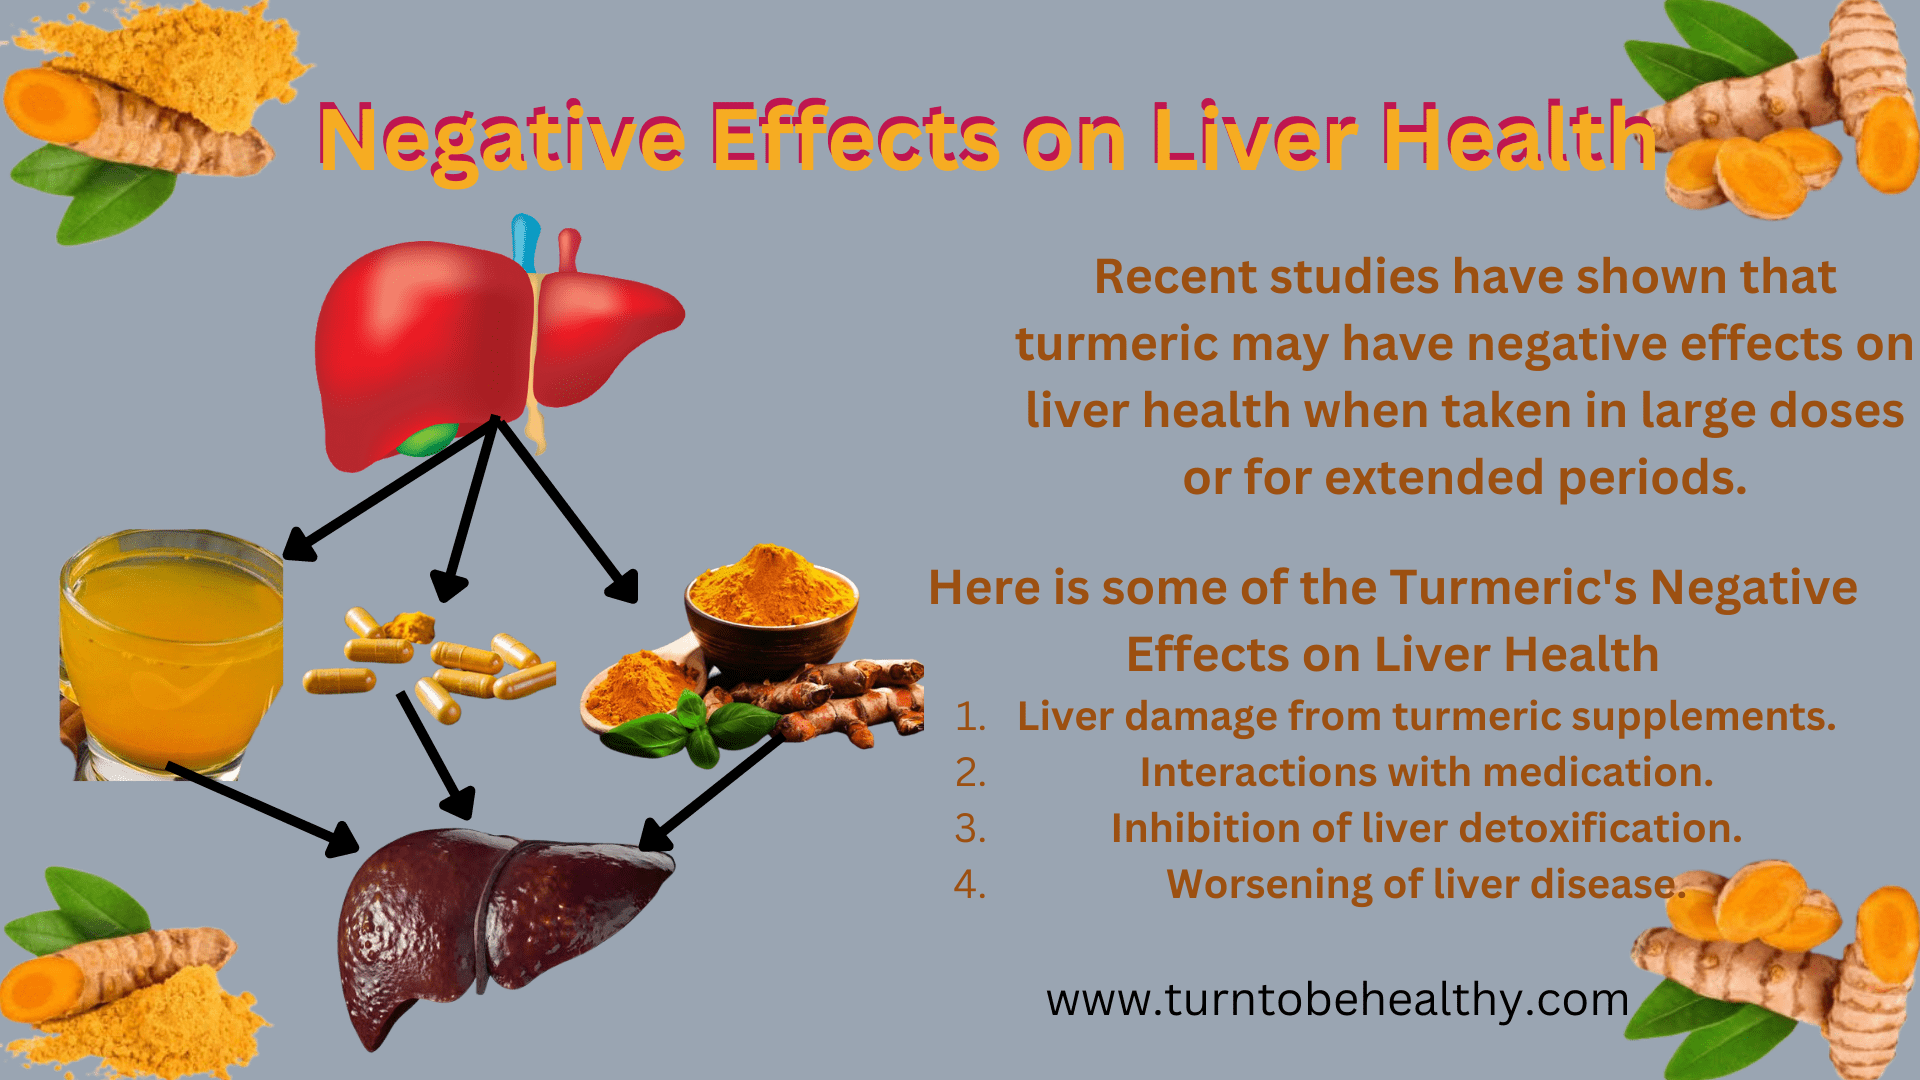 10 Serious Side Effects Turmeric. Turmeric is a spice that has been used for centuries in traditional medicine for its anti-inflammatory and antioxidant properties. However, recent studies have shown that turmeric may have negative effects on liver health when taken in large doses or for extended periods.